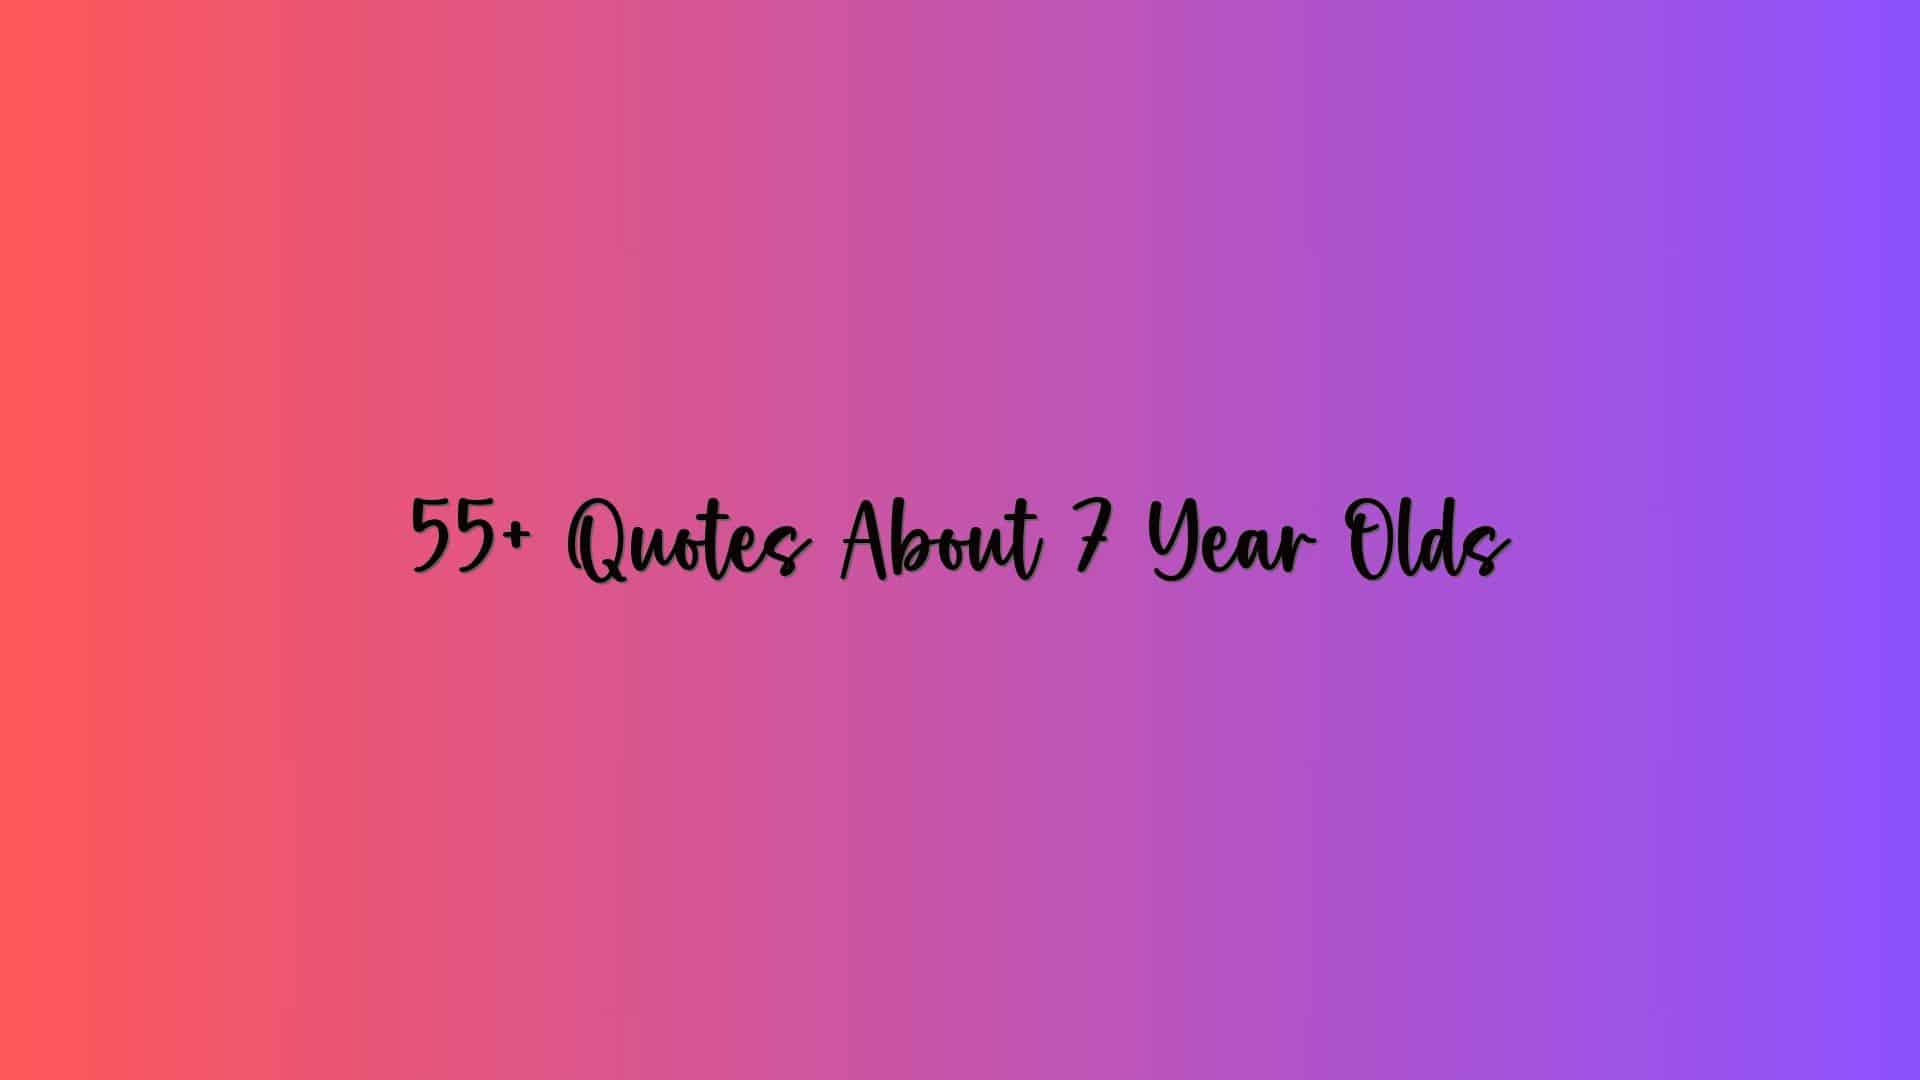 55+ Quotes About 7 Year Olds